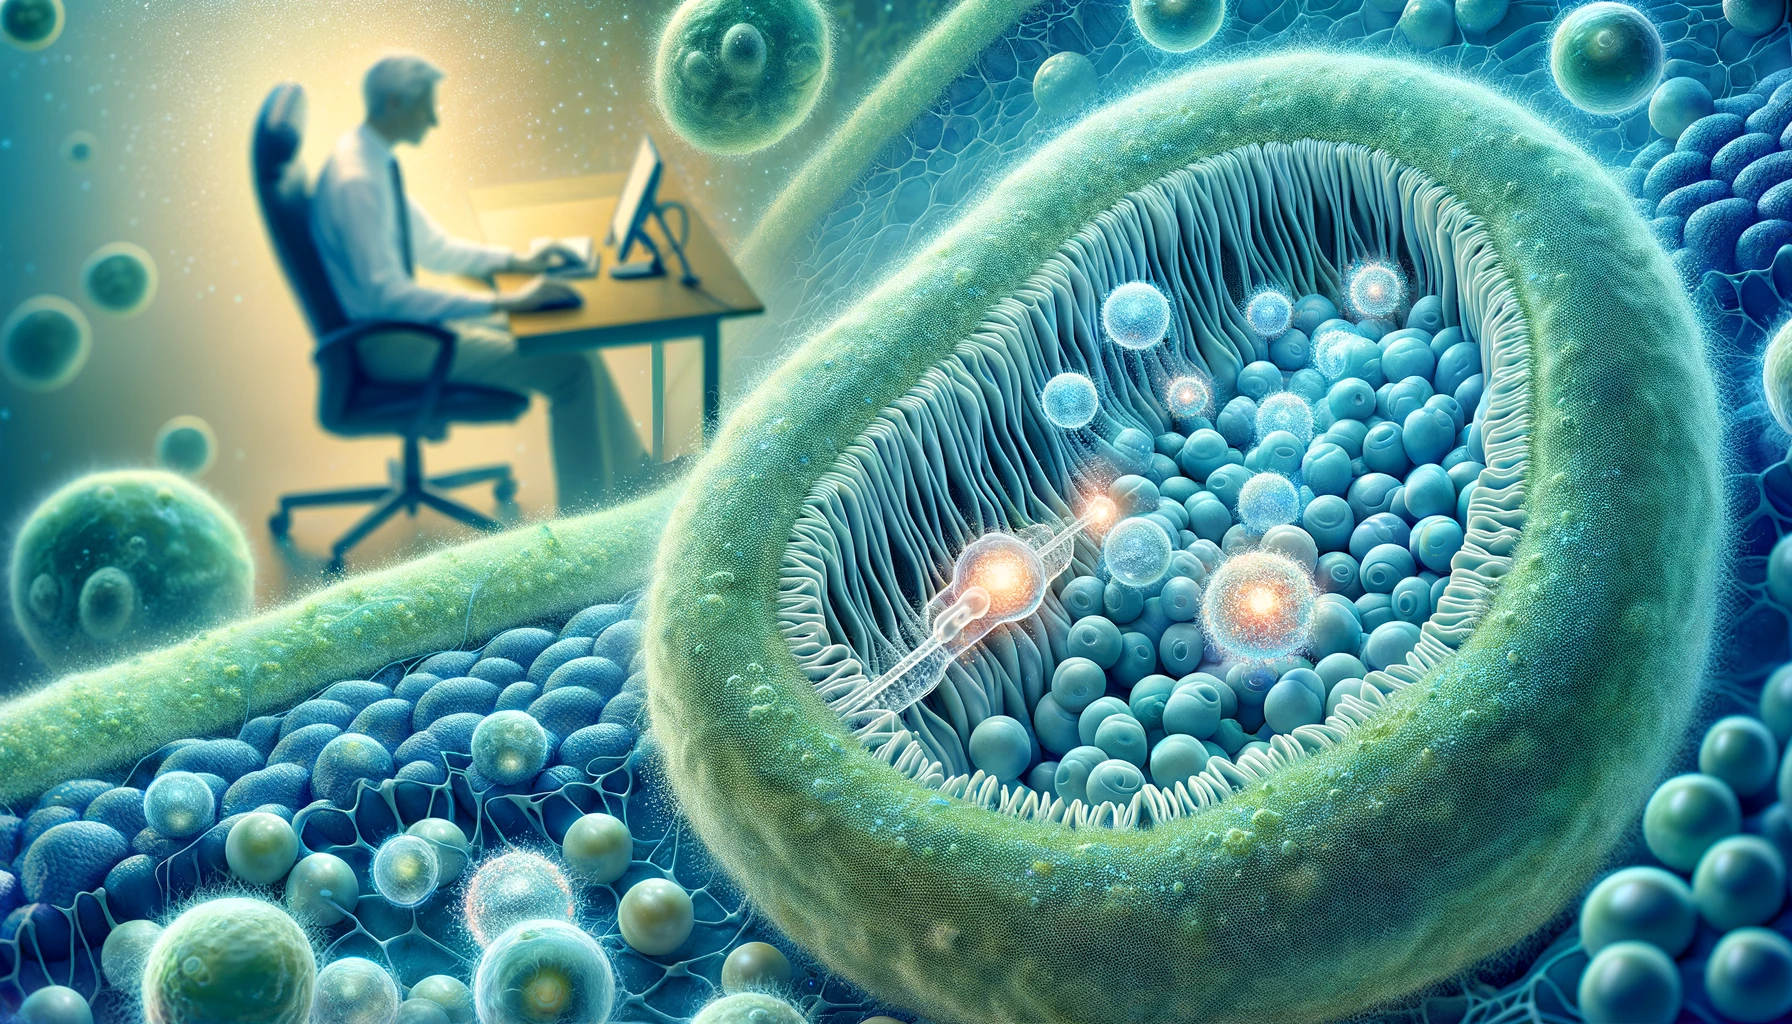 Digital illustration showing magnesium ions as glowing orbs assisting ion transport in a cell membrane, with a faint overlay of a sedentary individual in the background, embodying the connection between micronutrient function and lifestyle.